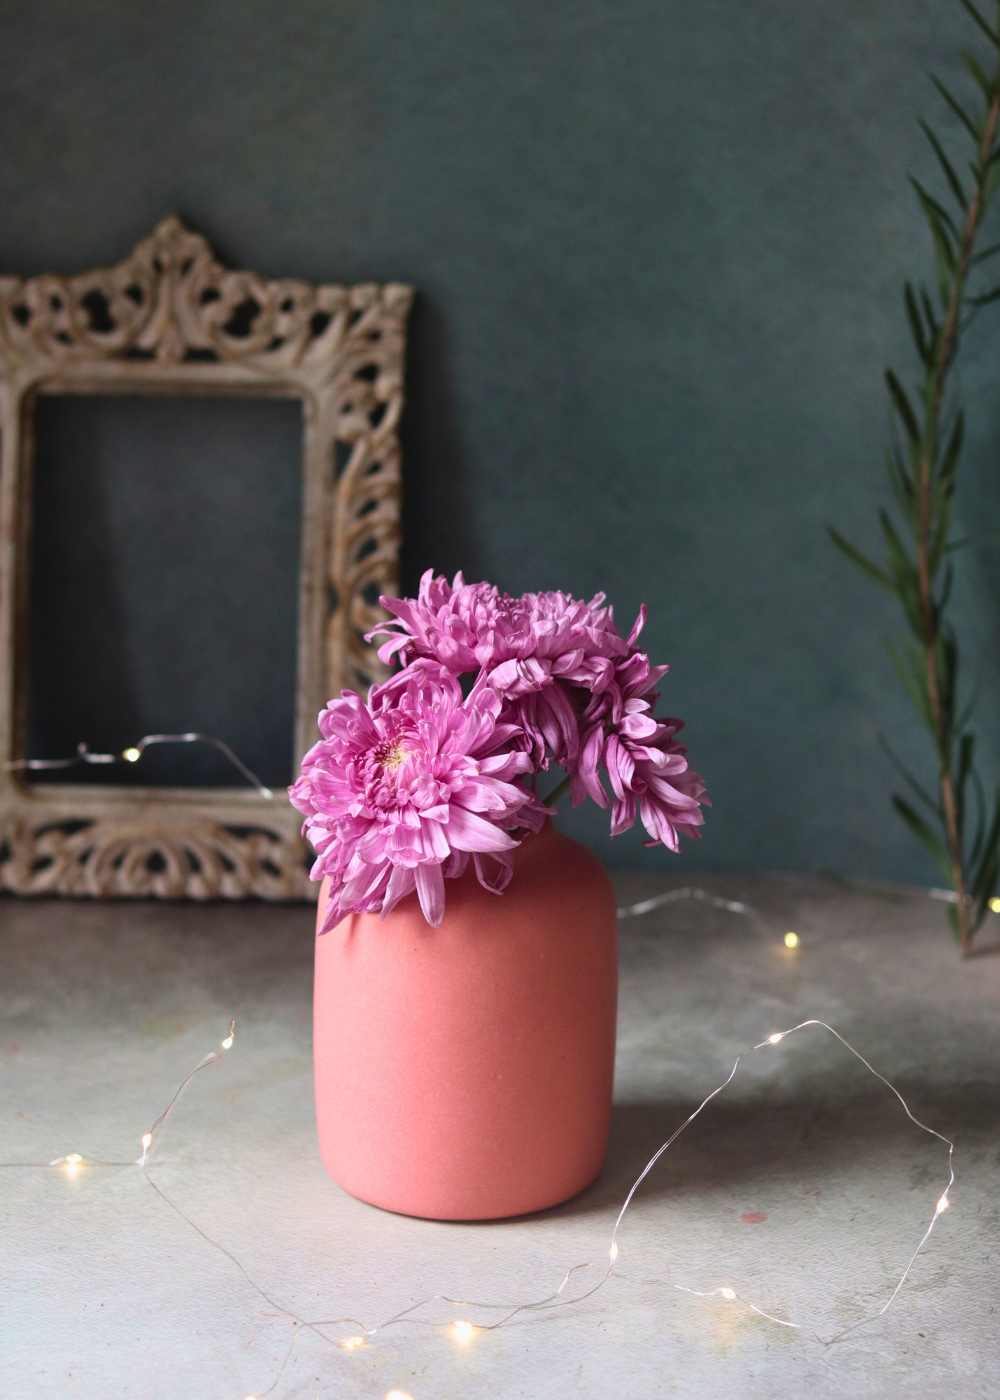 Peachy dream flower pot with flowers 